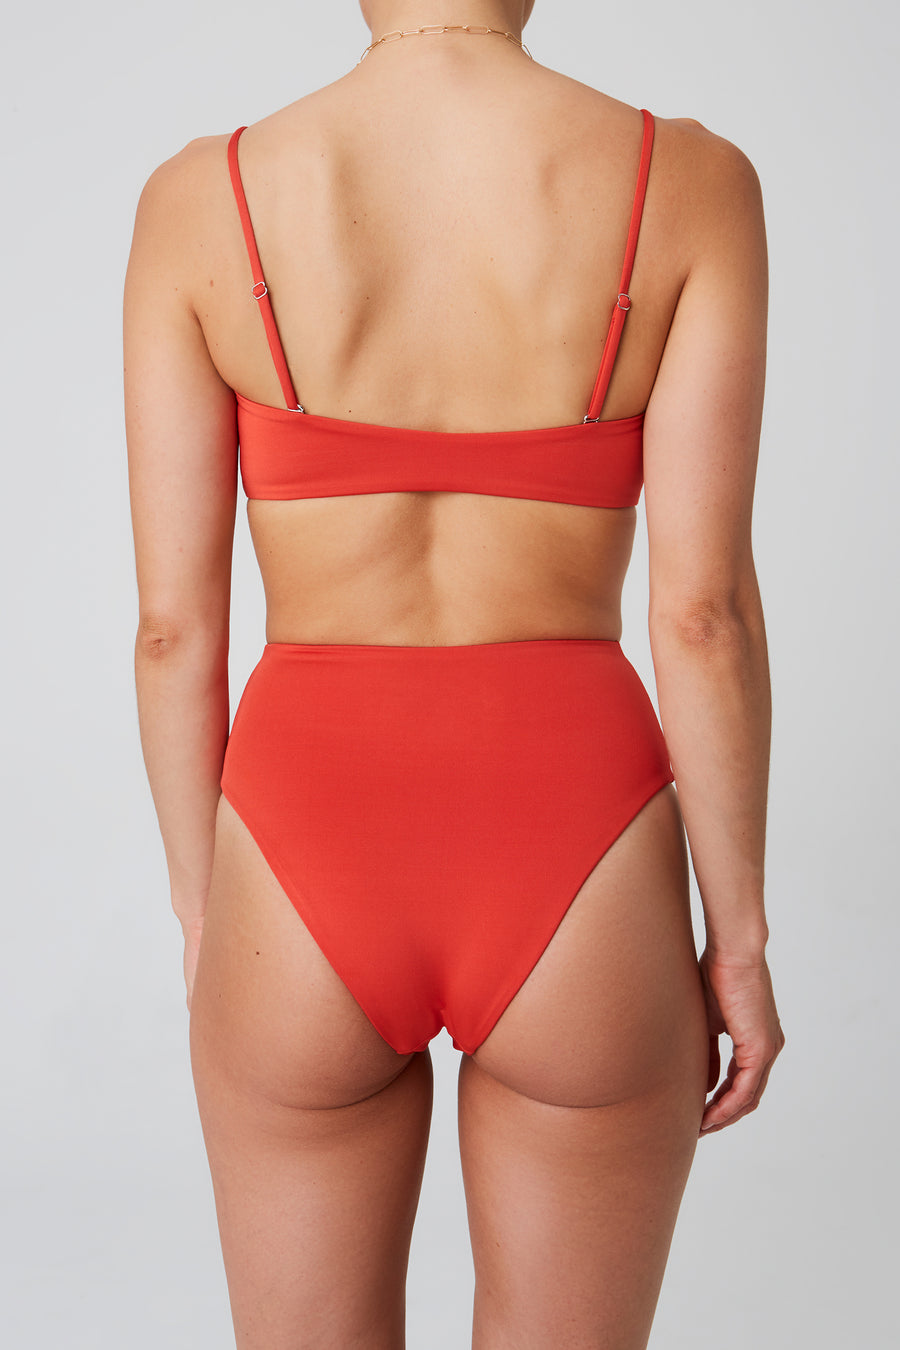 TOP – bandeau, red